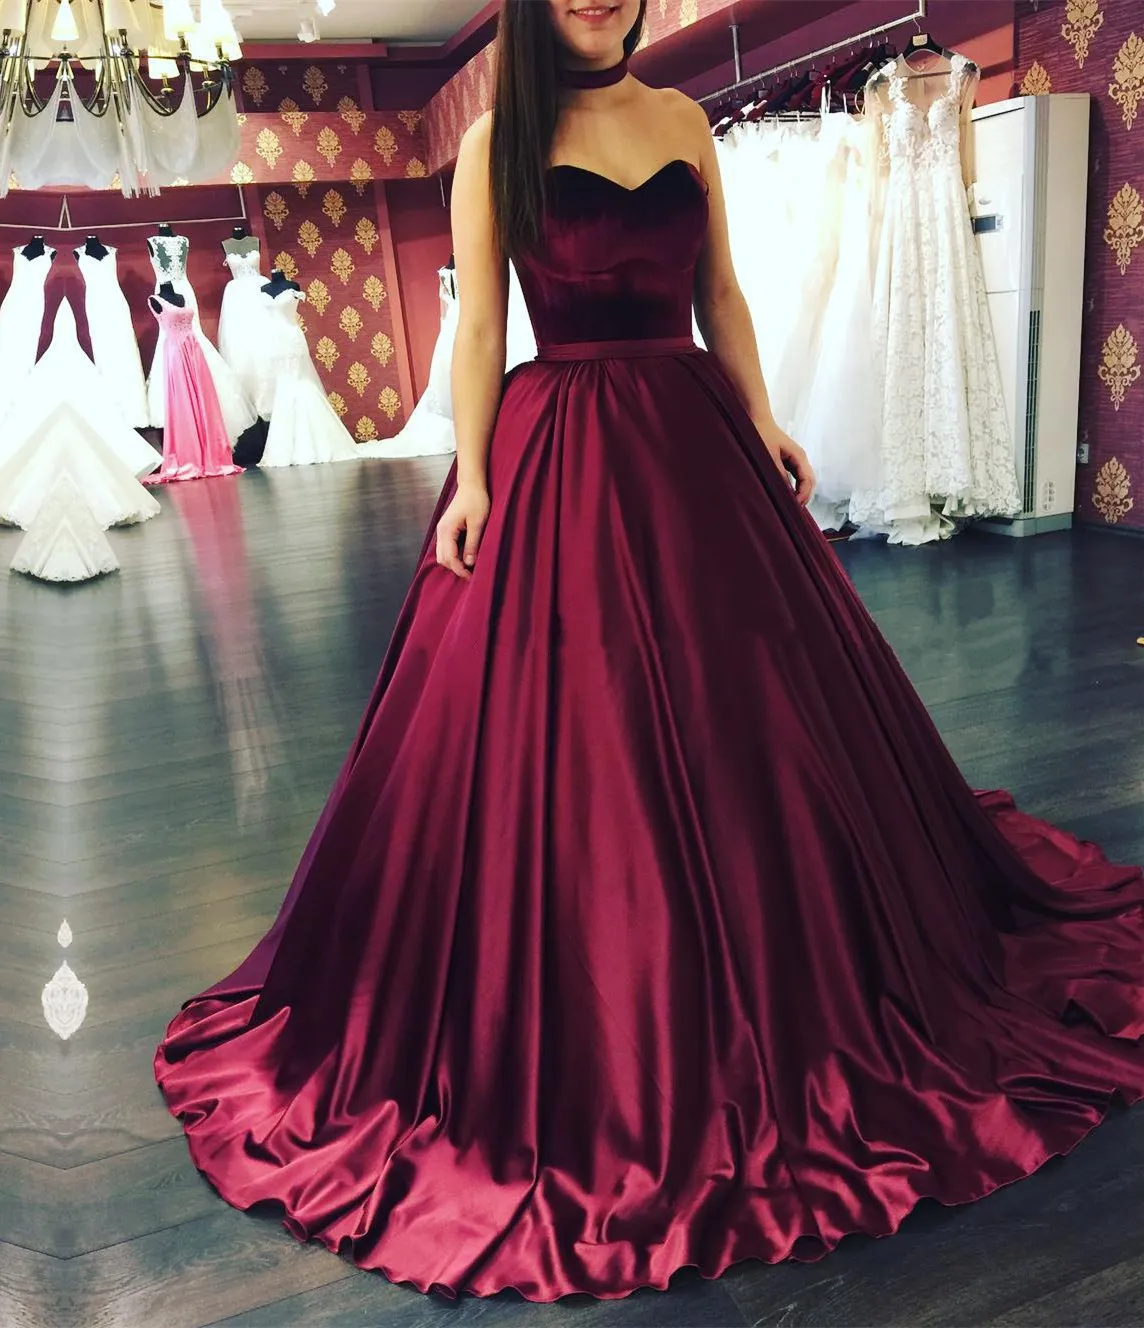 Women's exciting maroon evening gown with side slit skirt and royal  rhinestone bodice